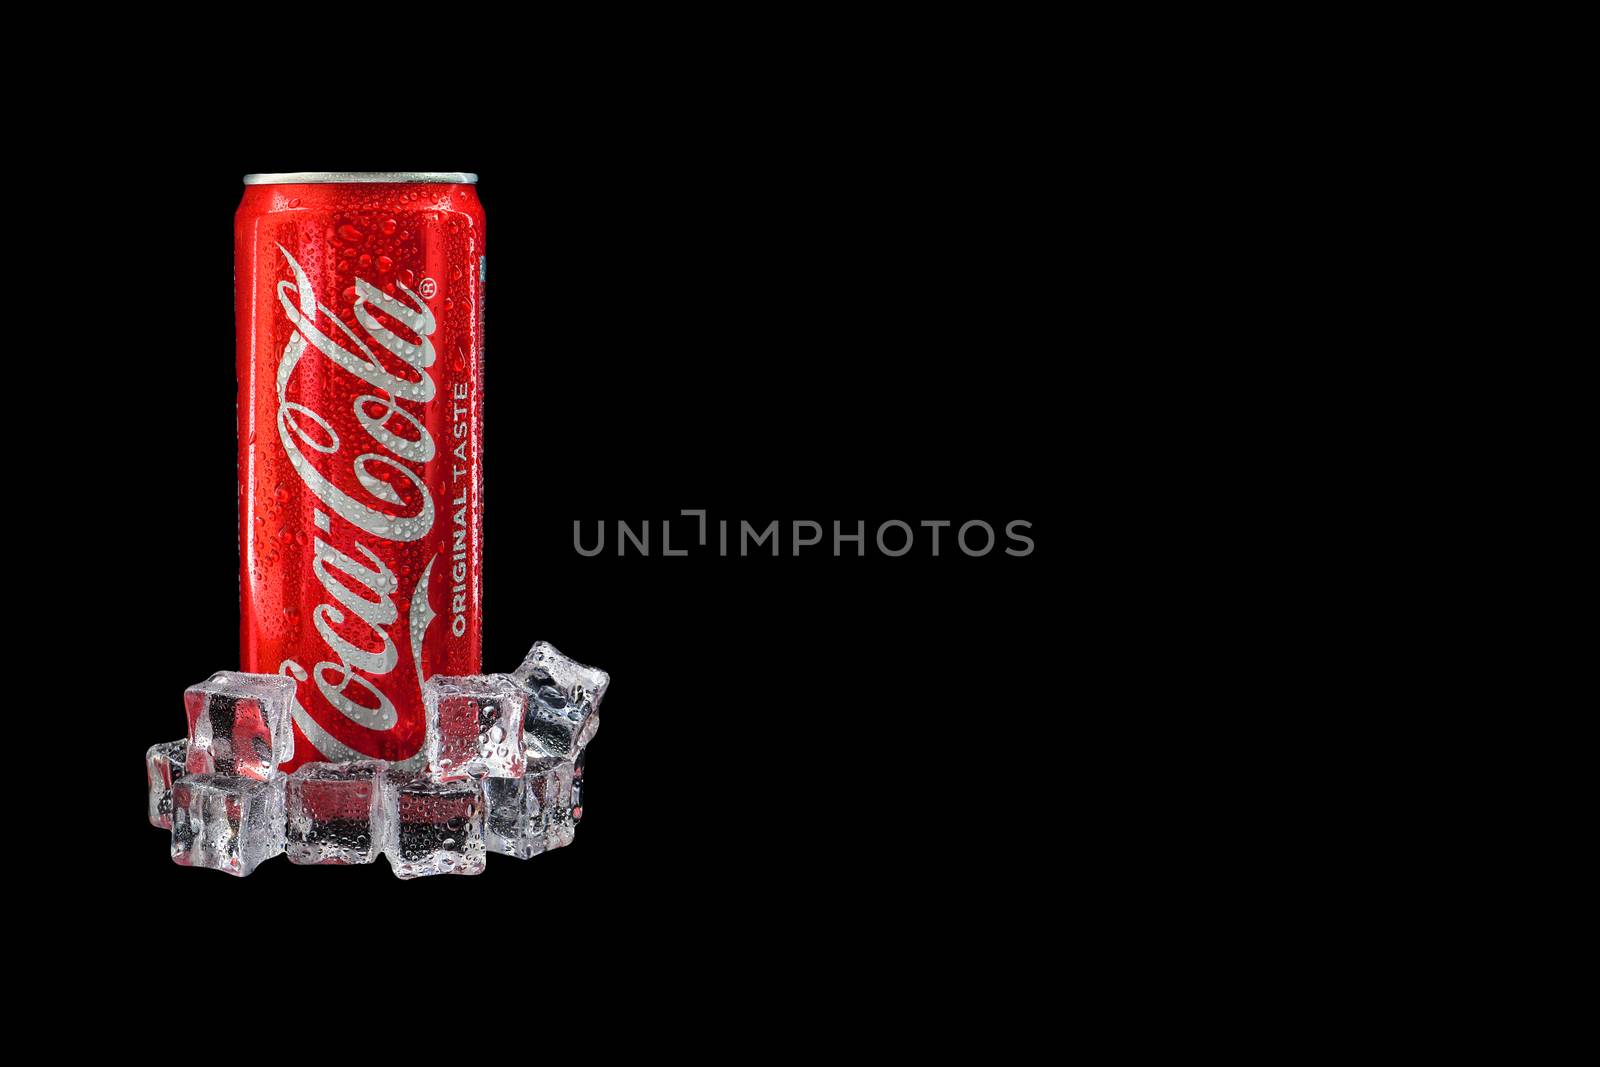 Kuala Lumpur, Malaysia - October 19, 2020 : Coca Cola or Coke Drink on black background by silverwings